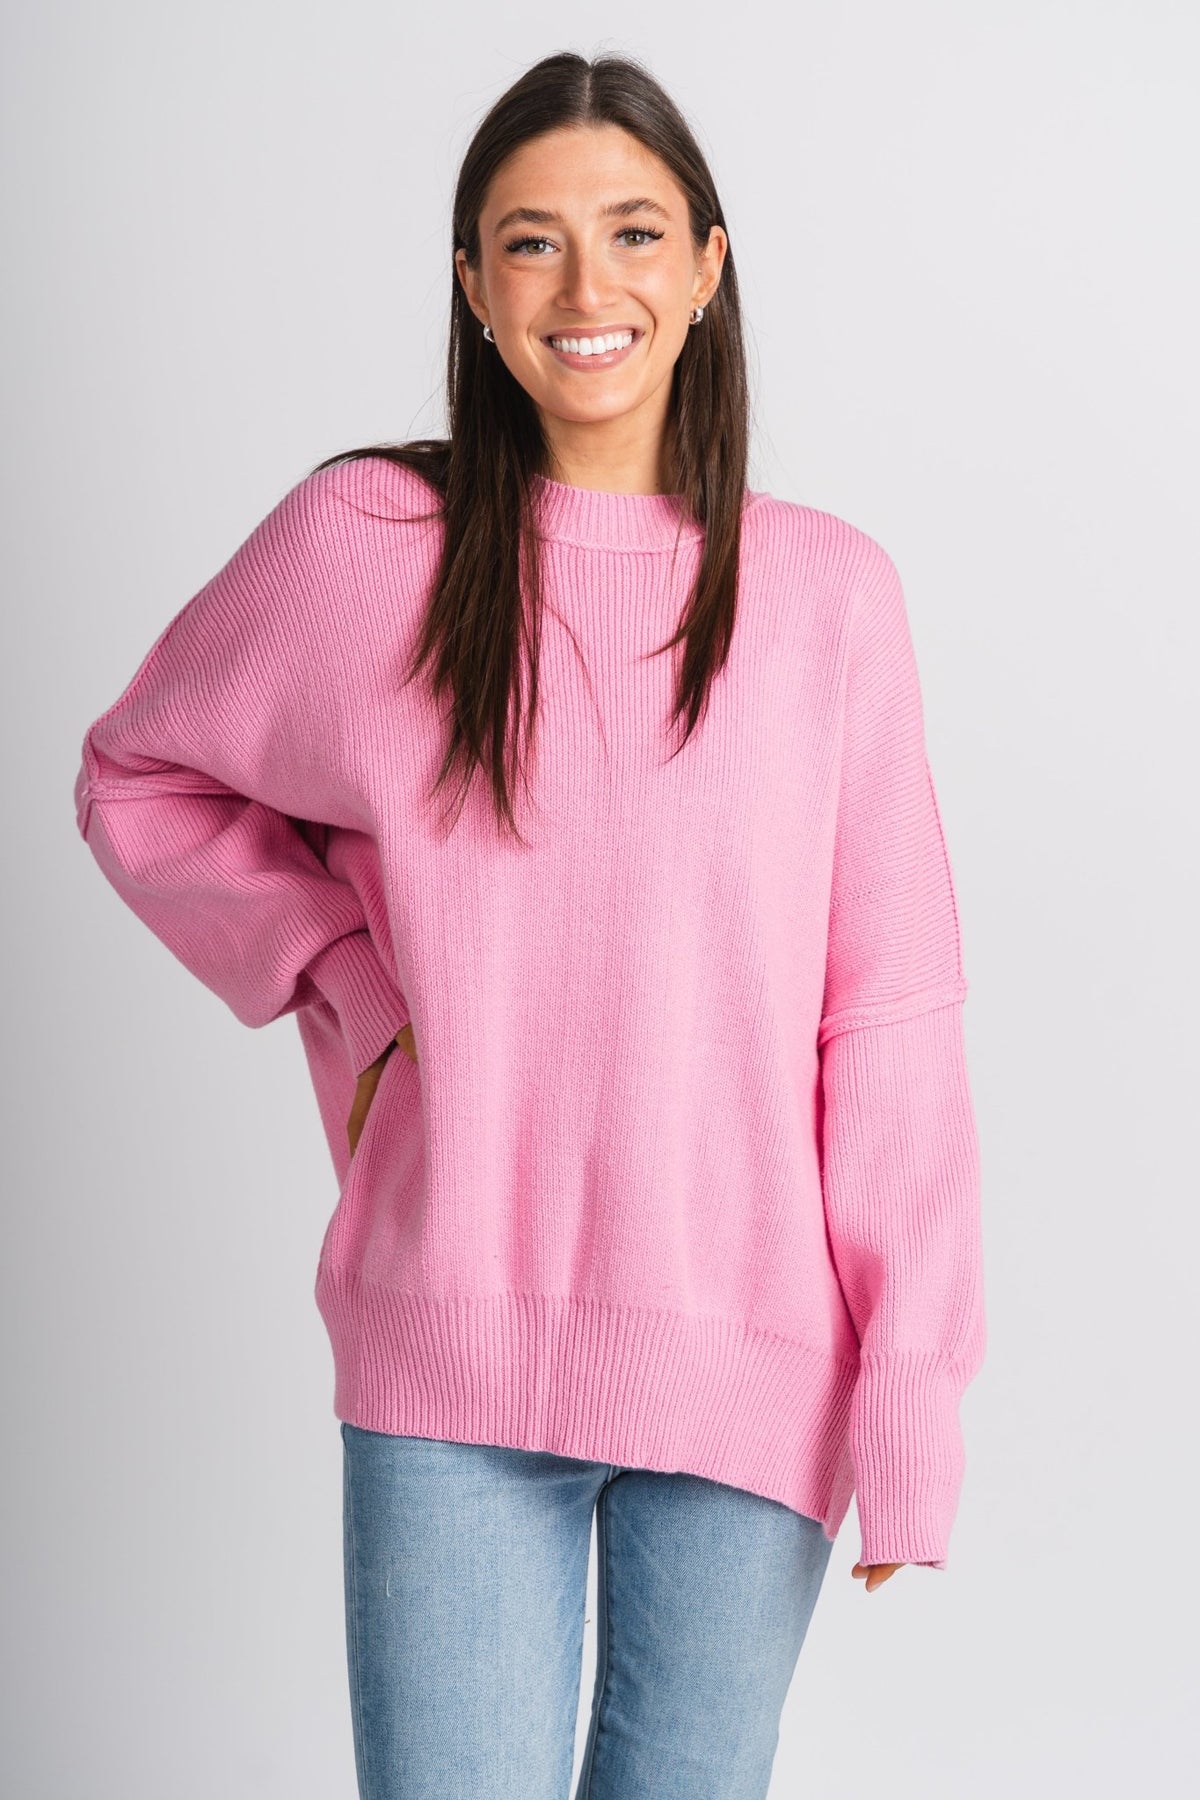 Oversized mock neck sweater pink - Stylish Sweaters - Cute Easter Outfits at Lush Fashion Lounge Boutique in Oklahoma